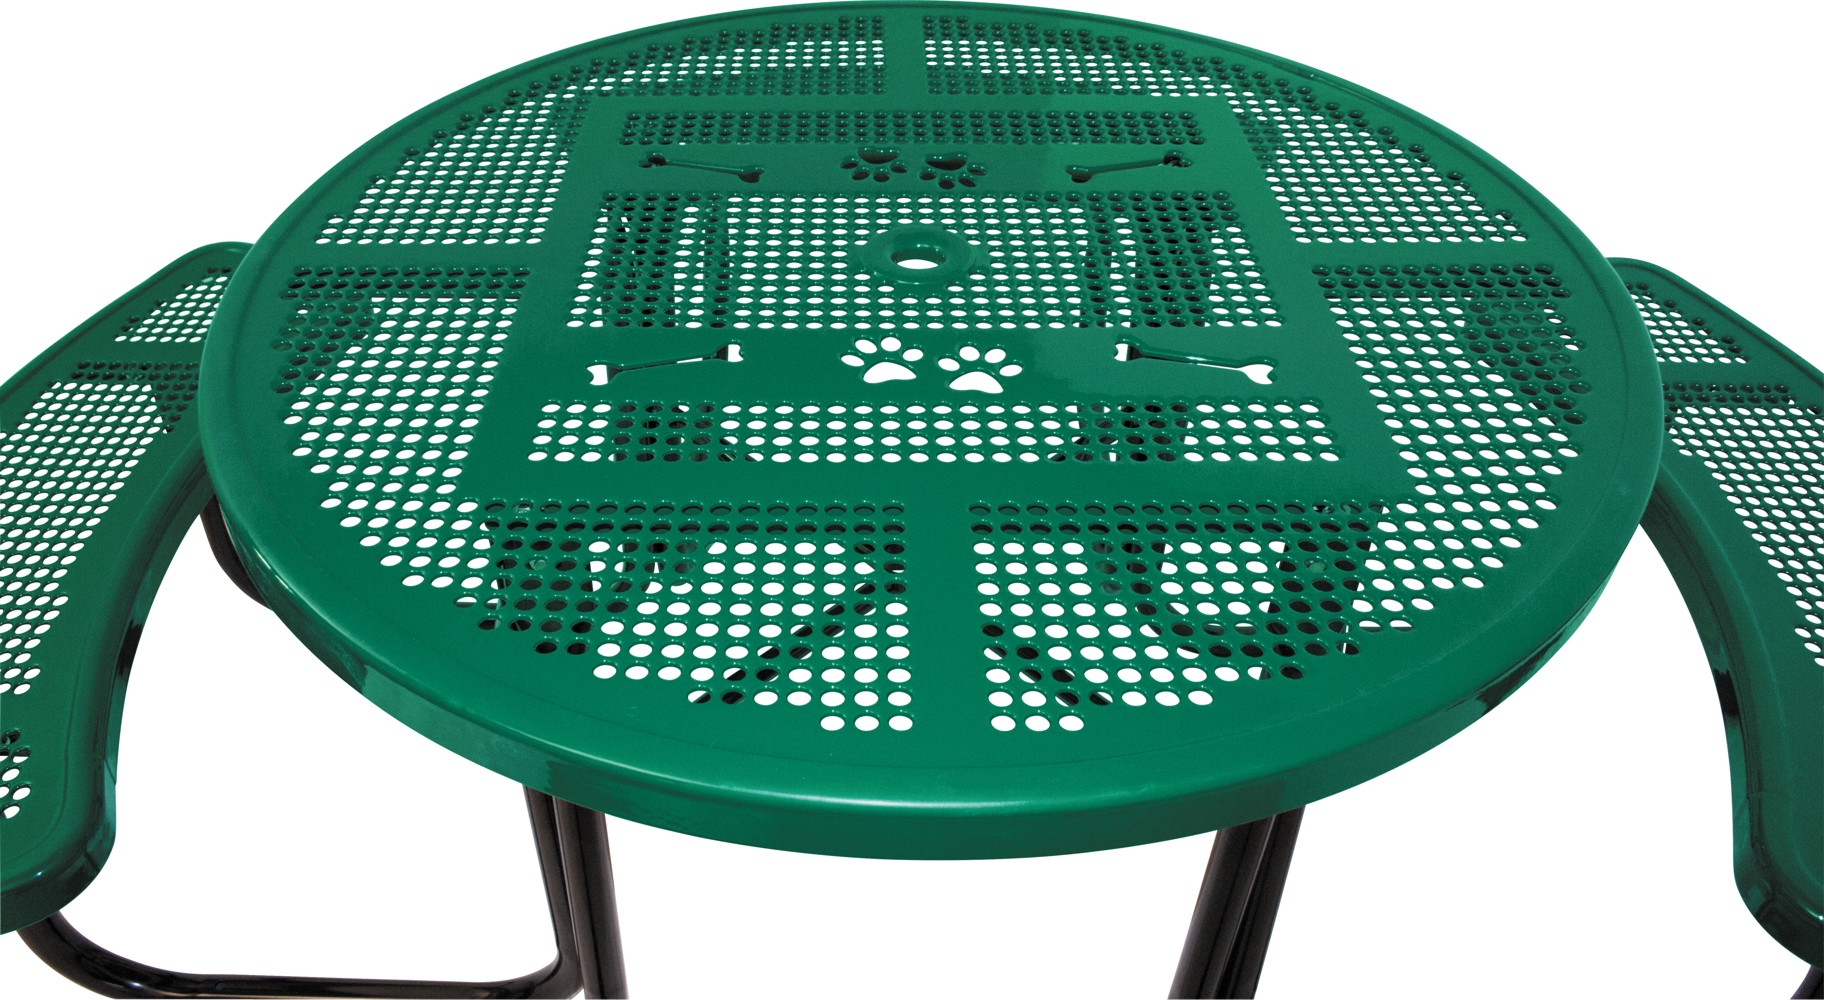 Chow Hound Table - Dog Park Equipment - All People Can Play